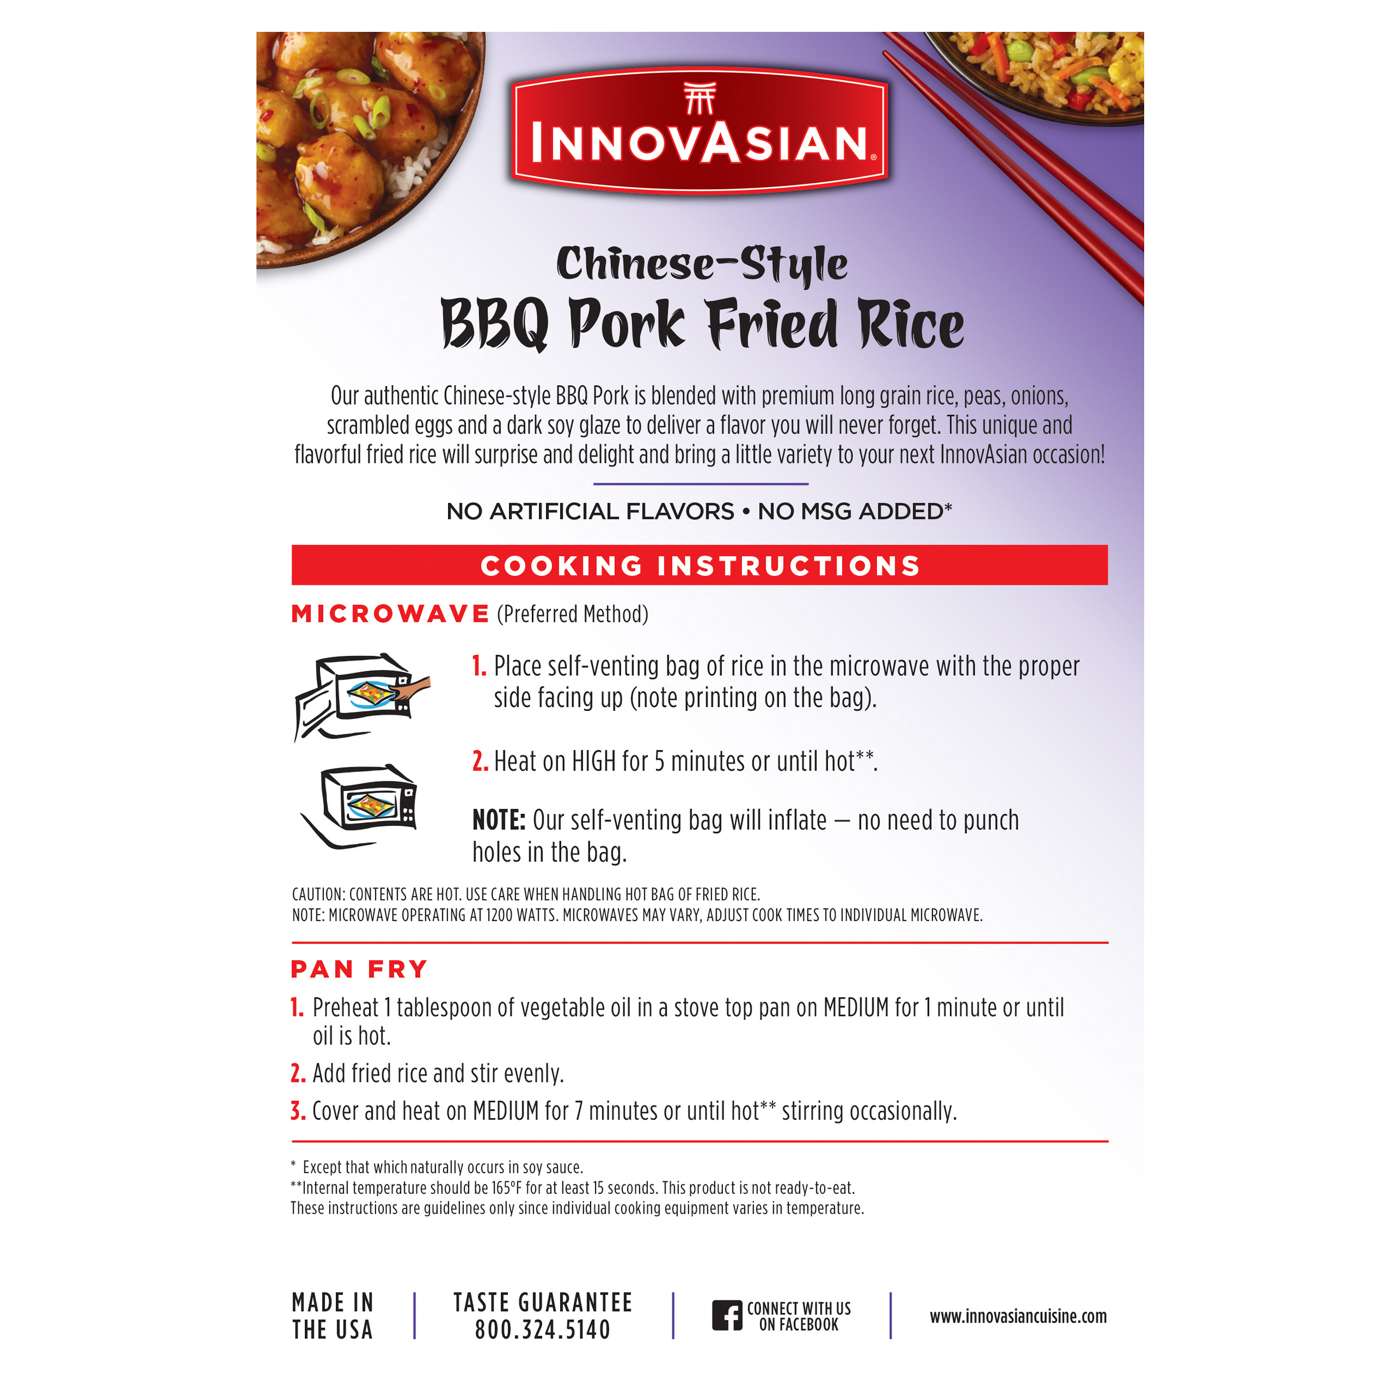 InnovAsian Frozen Chinese-Style BBQ Pork Fried Rice; image 10 of 11